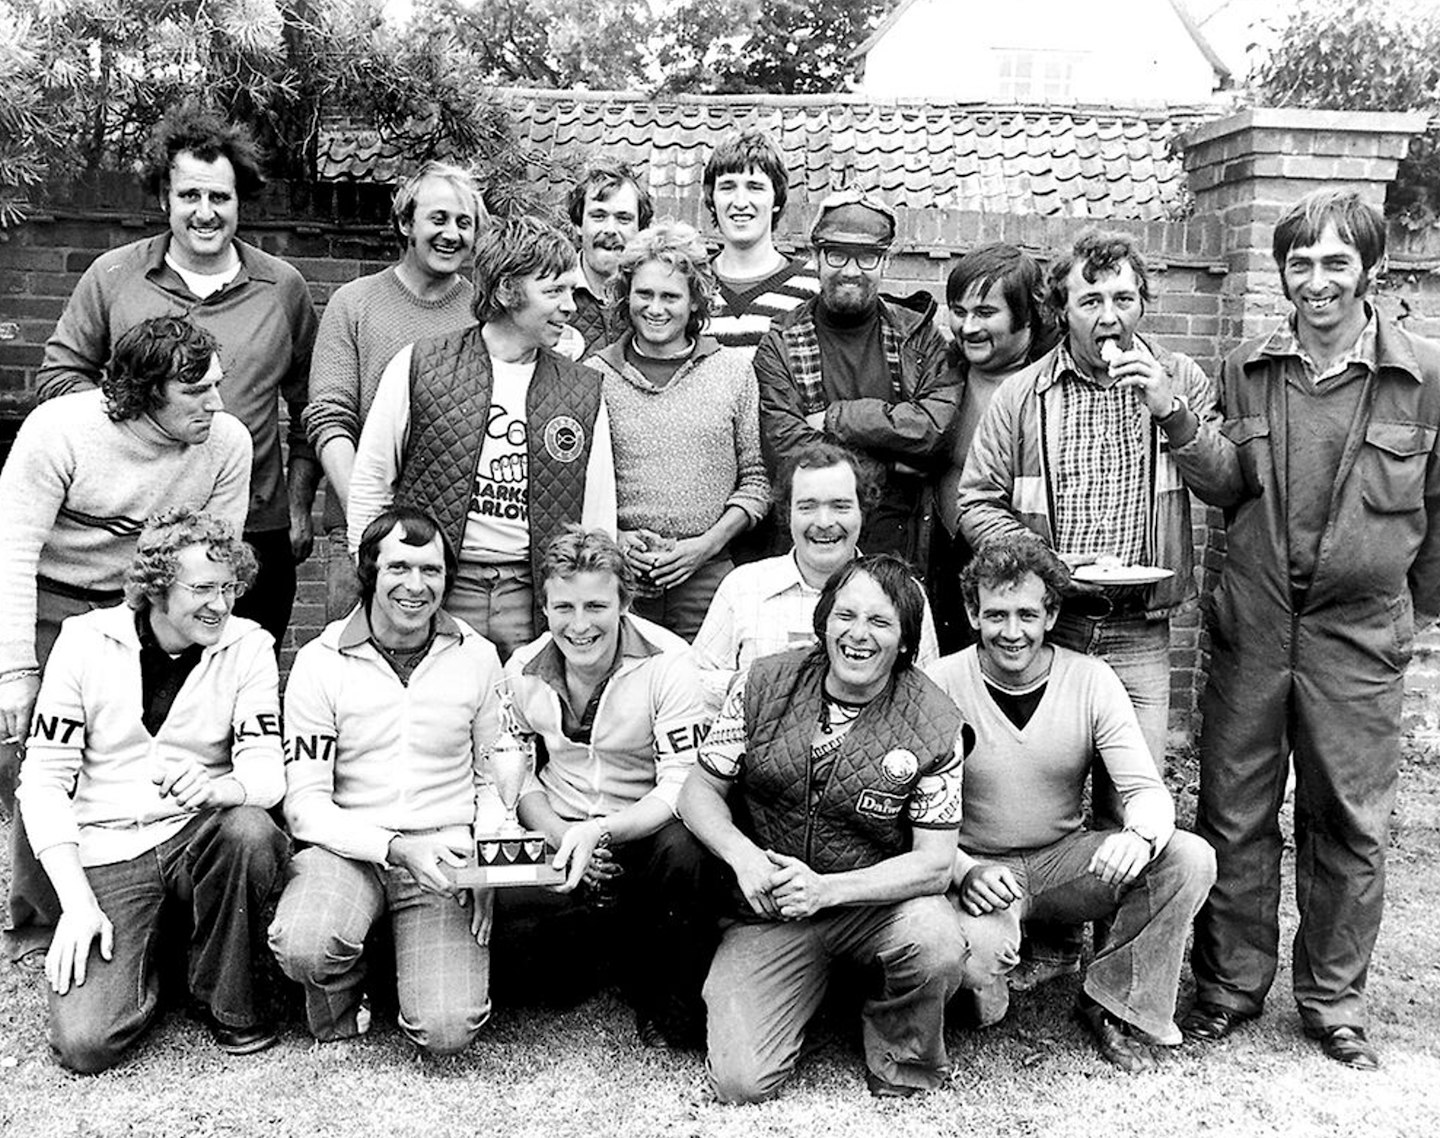 Roy Marlow (back row, second from left) loved the camaraderie of the 1970s. Here he is with the all-conquering Likely Lads